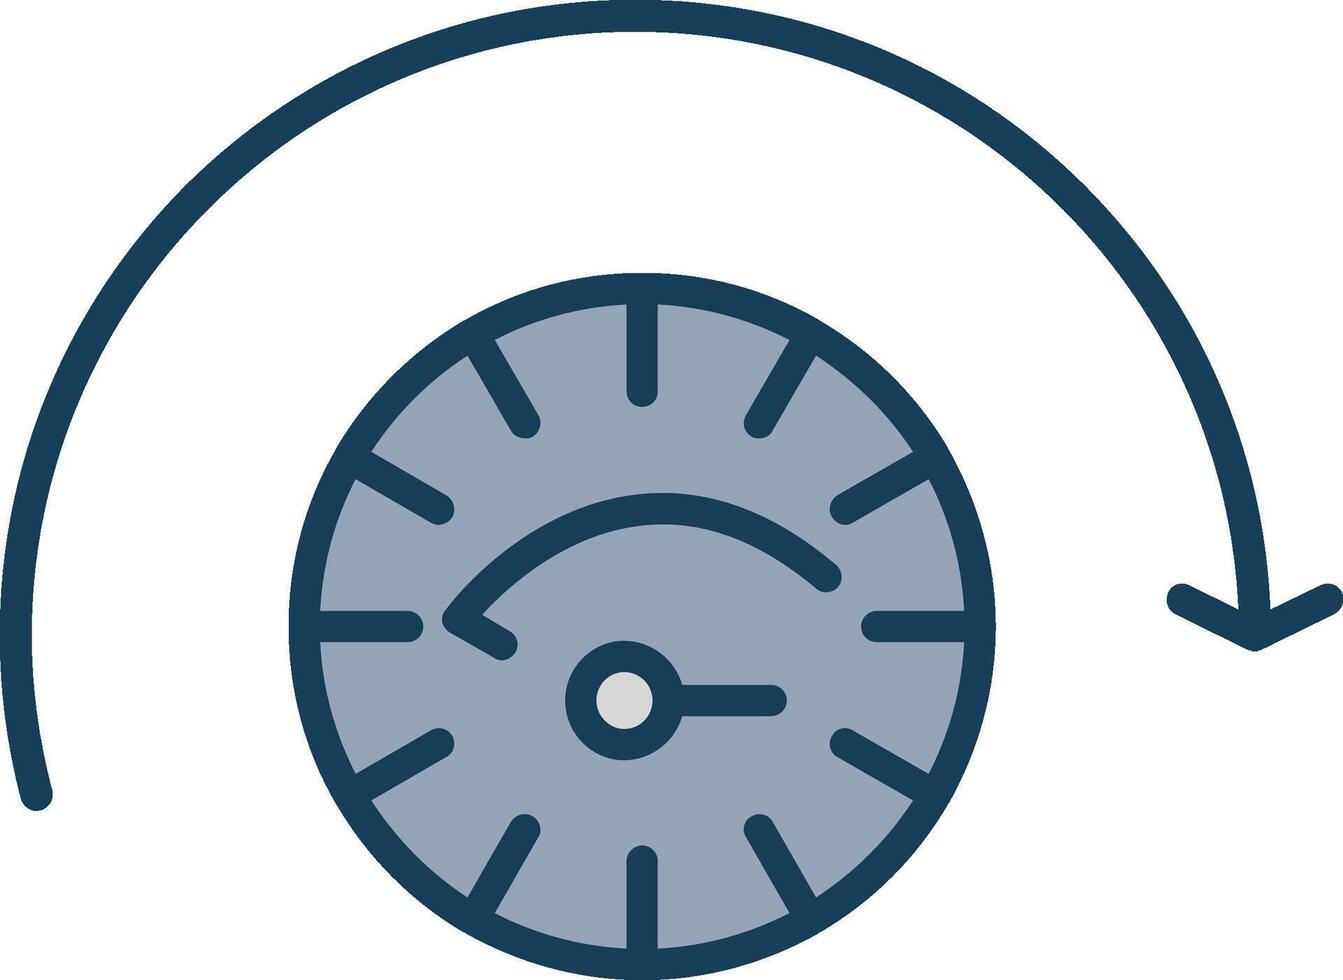 Performnce Line Filled Grey Icon vector